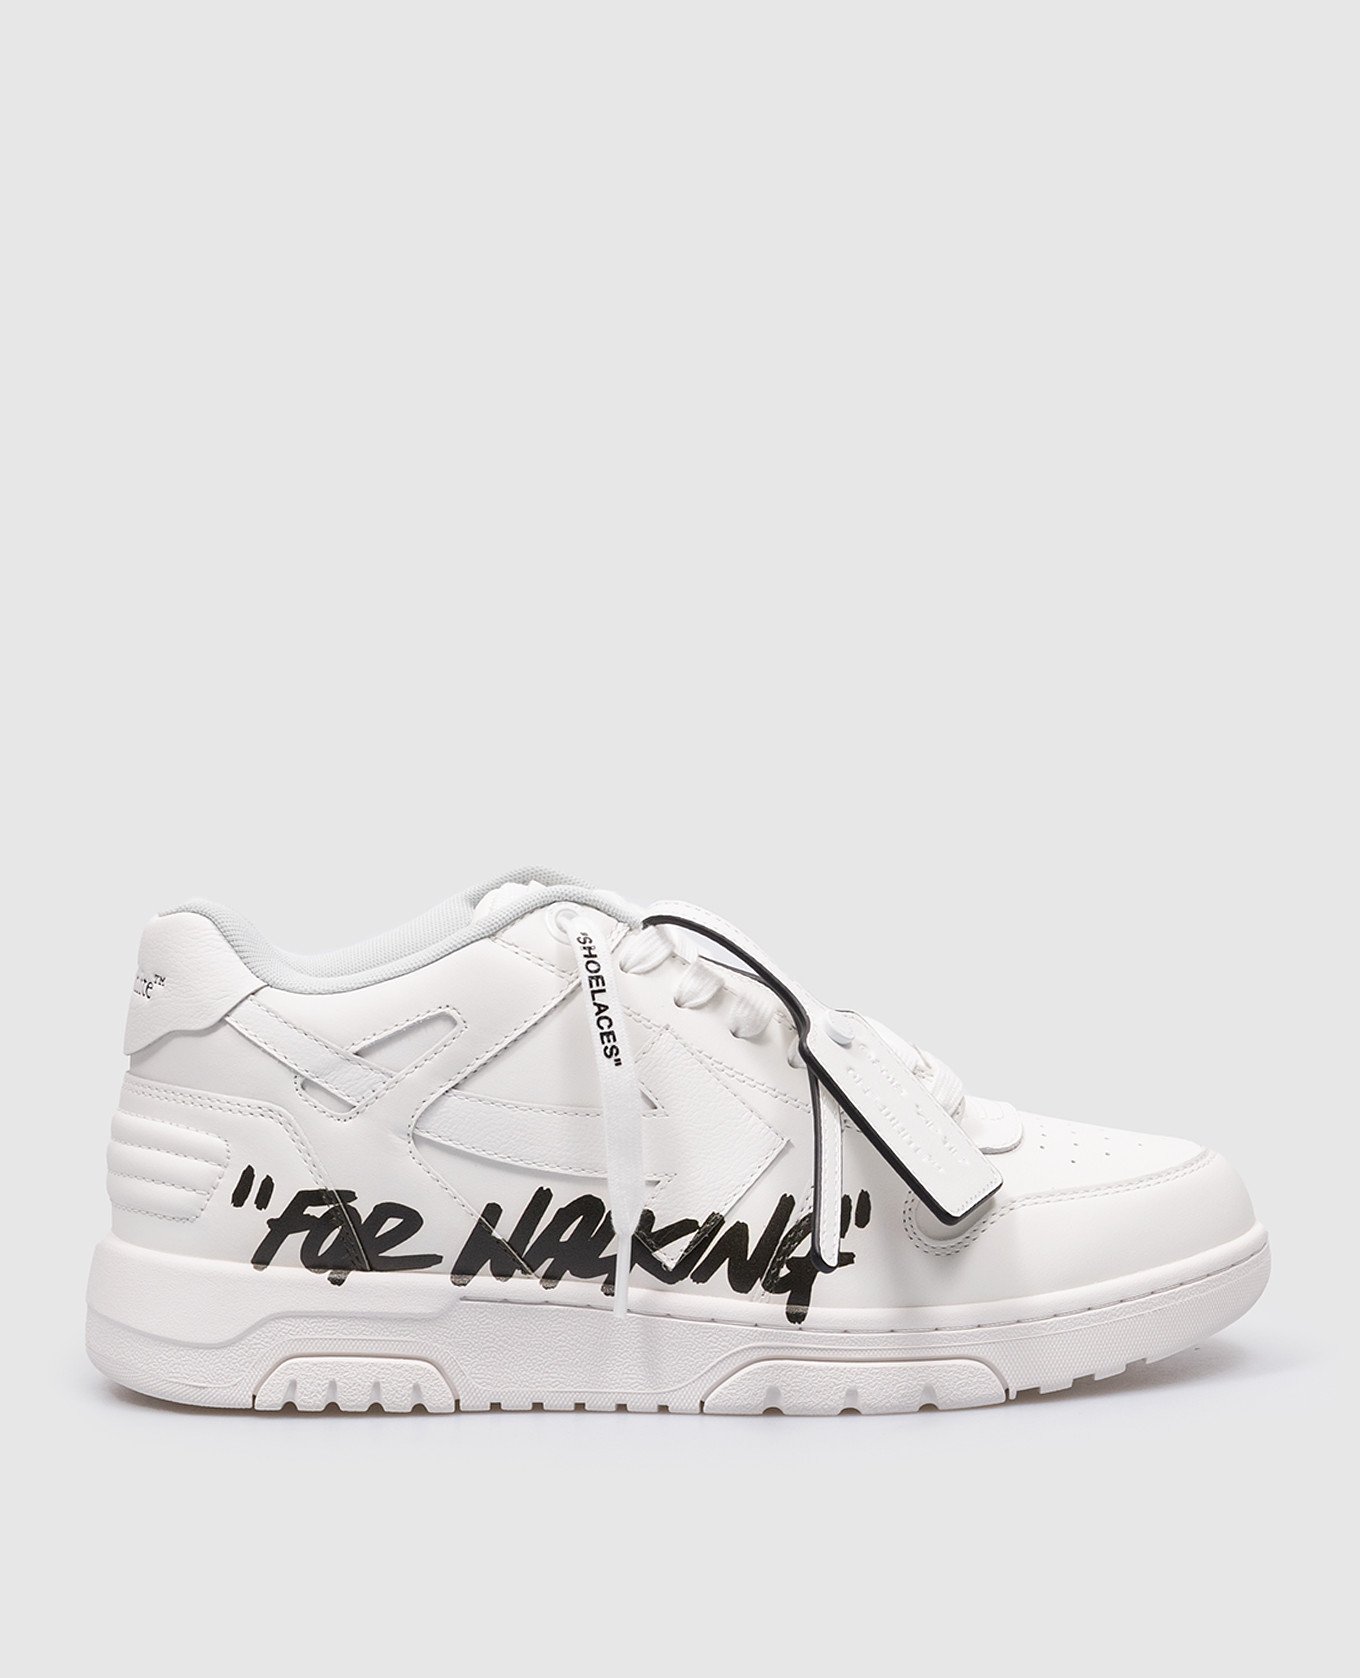 Out Of Office white leather sneakers with contrasting For Walking print